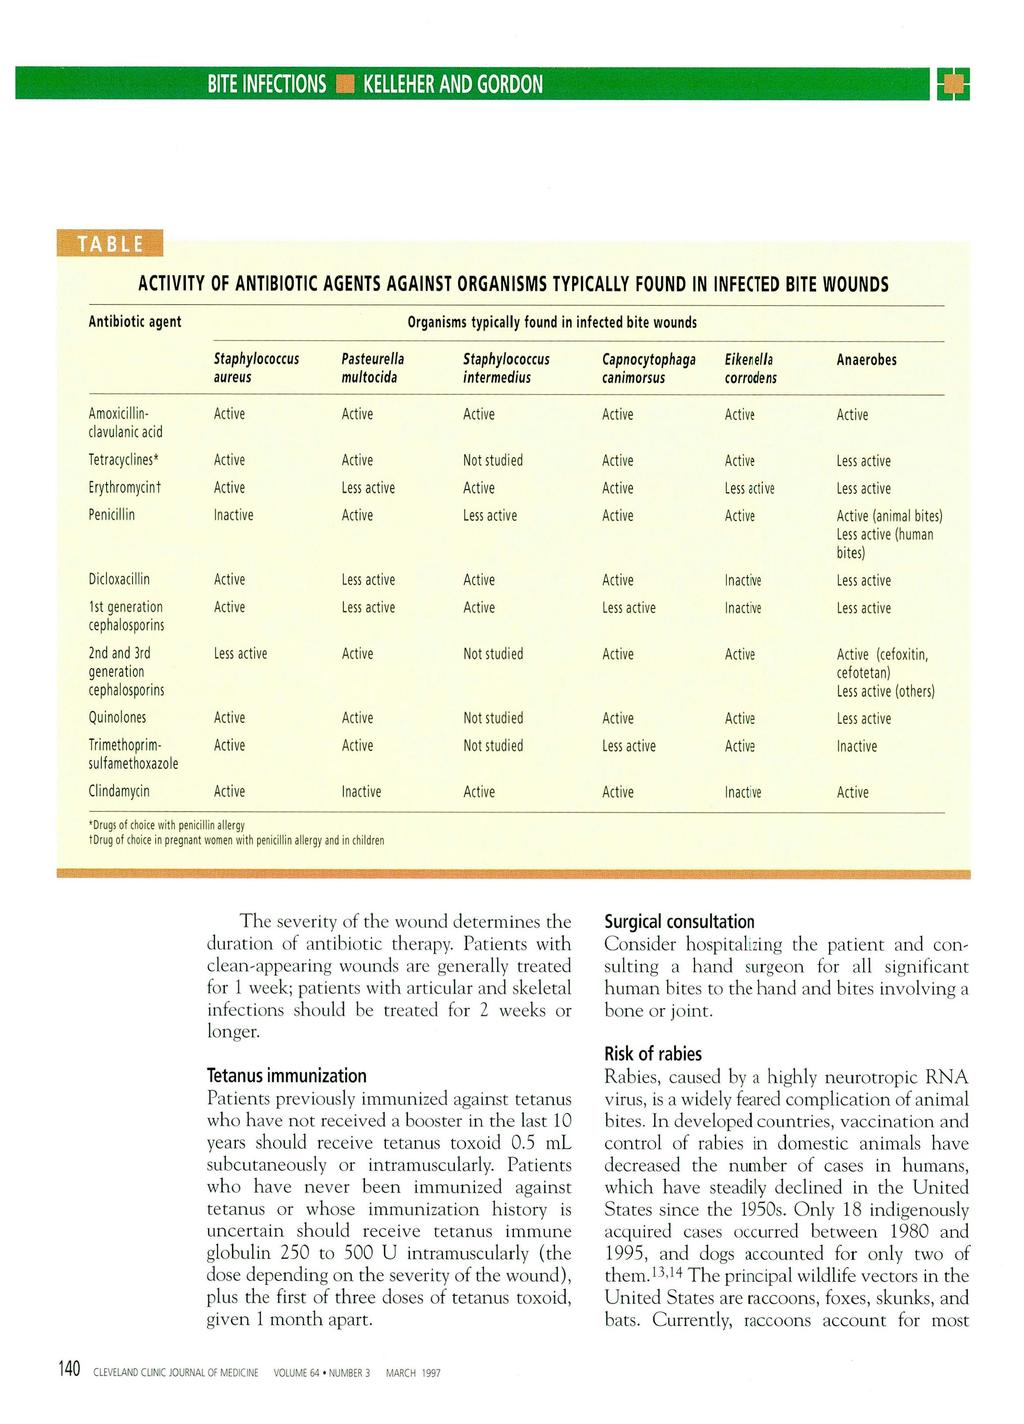 BITE INFECTIONS KELLEHER AND GORDON TABLE ACTIVITY OF ANTIBIOTIC AGENTS AGAINST ORGANISMS TYPICALLY FOUND IN INFECTED BITE WOUNDS Antibiotic agent Organisms typically found in infected bite wounds